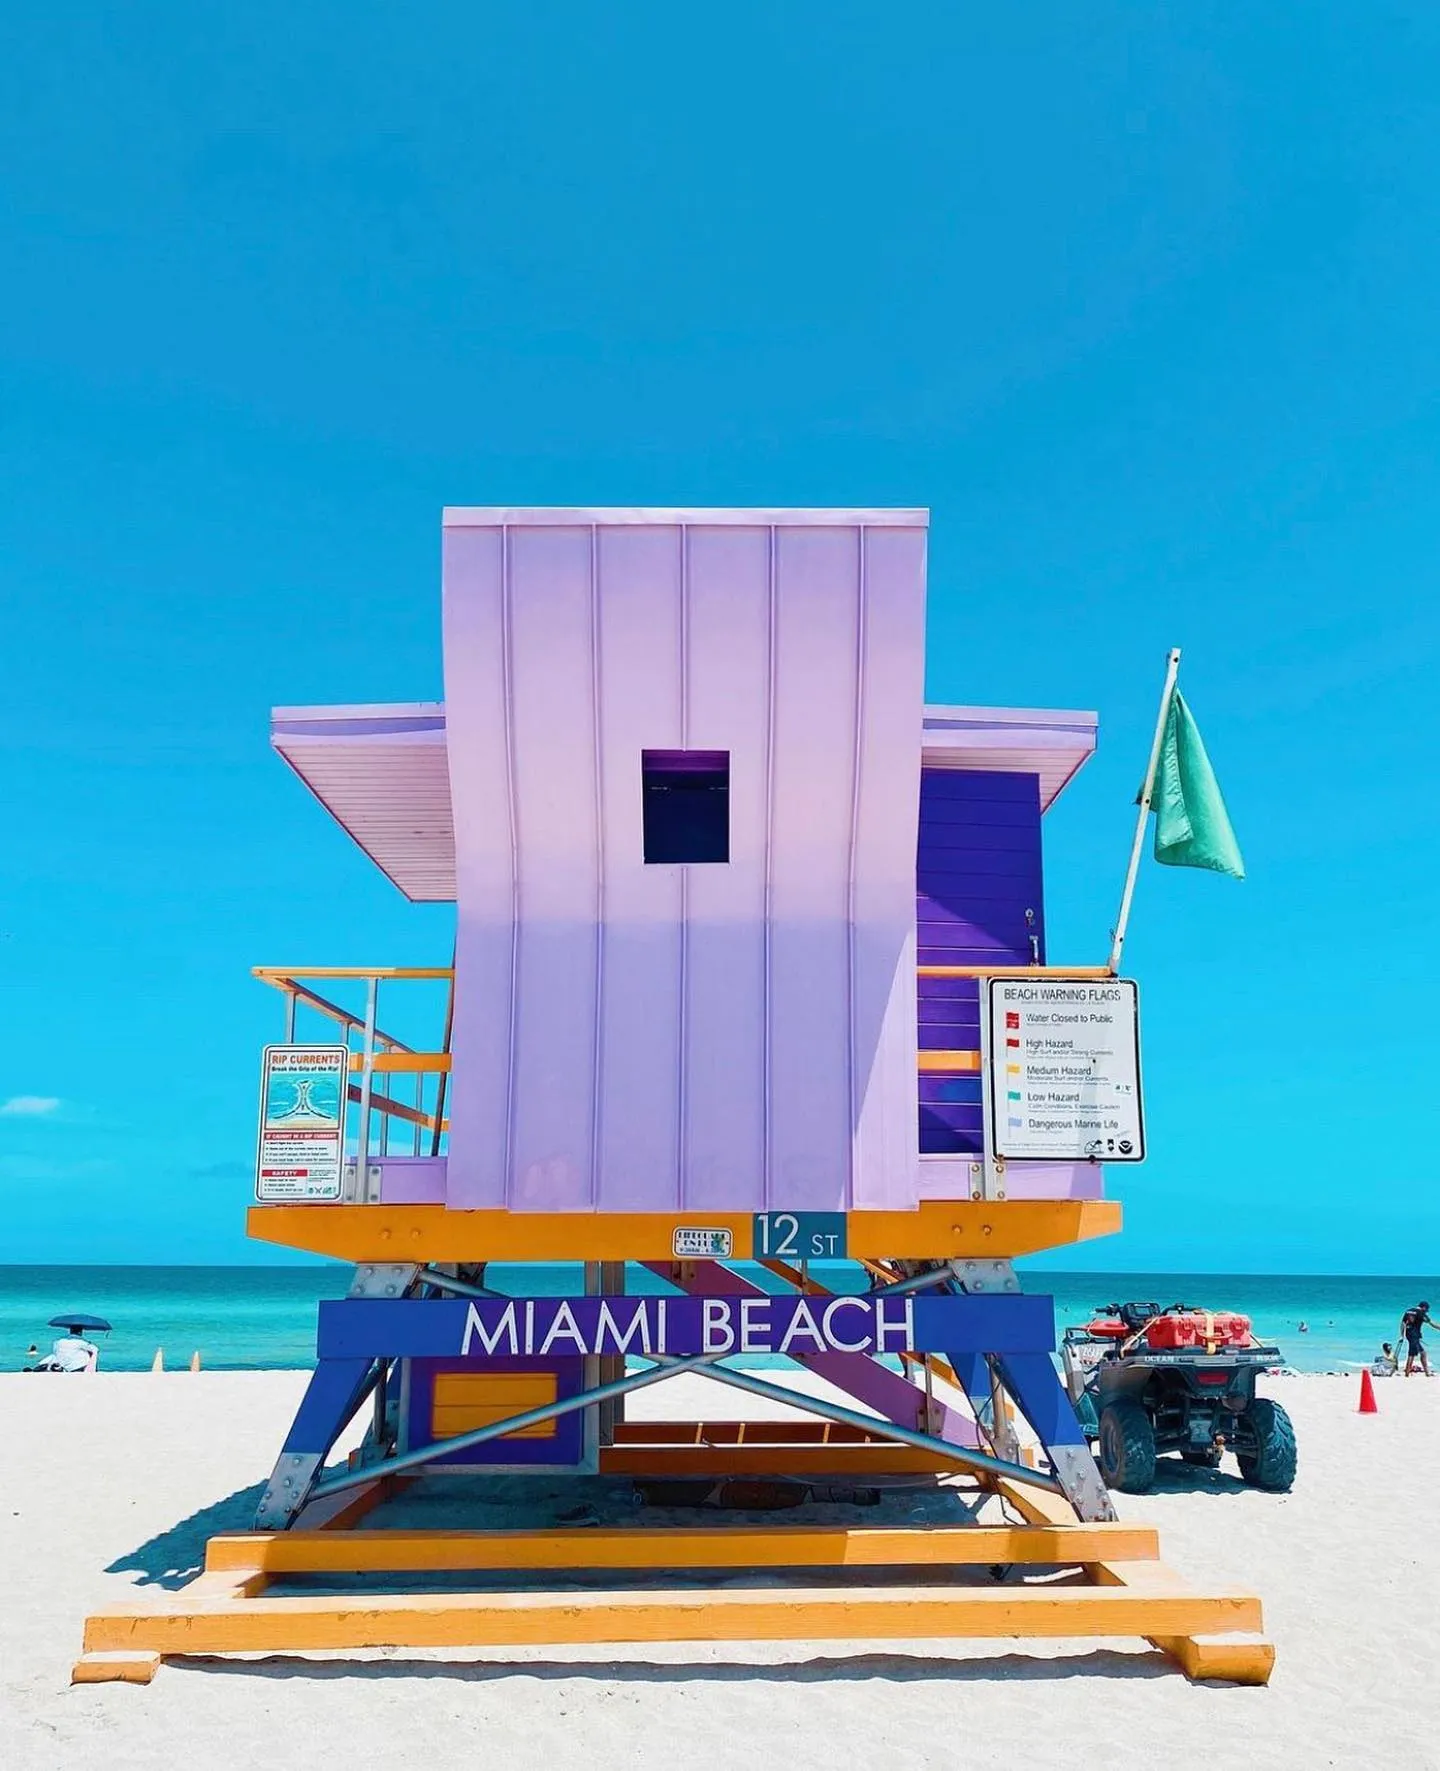 image  1 Miami - Our now iconic lifeguard stands originated in the early 1990s as part of the reconstruction after Hurricane